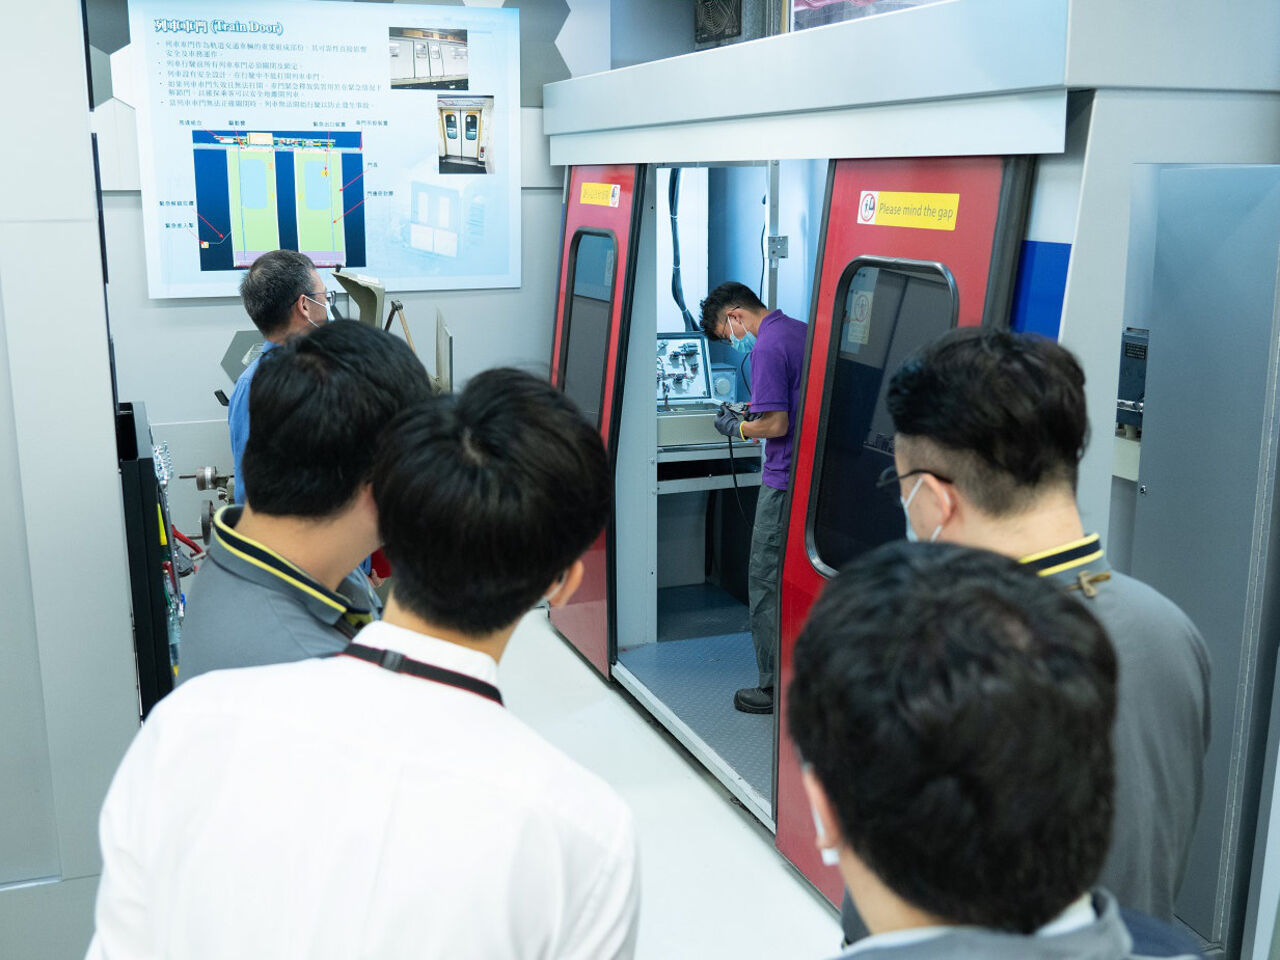 Competitors examine a rail carriage during the final of the Rail Vehicle Technology competition in May 2021.
